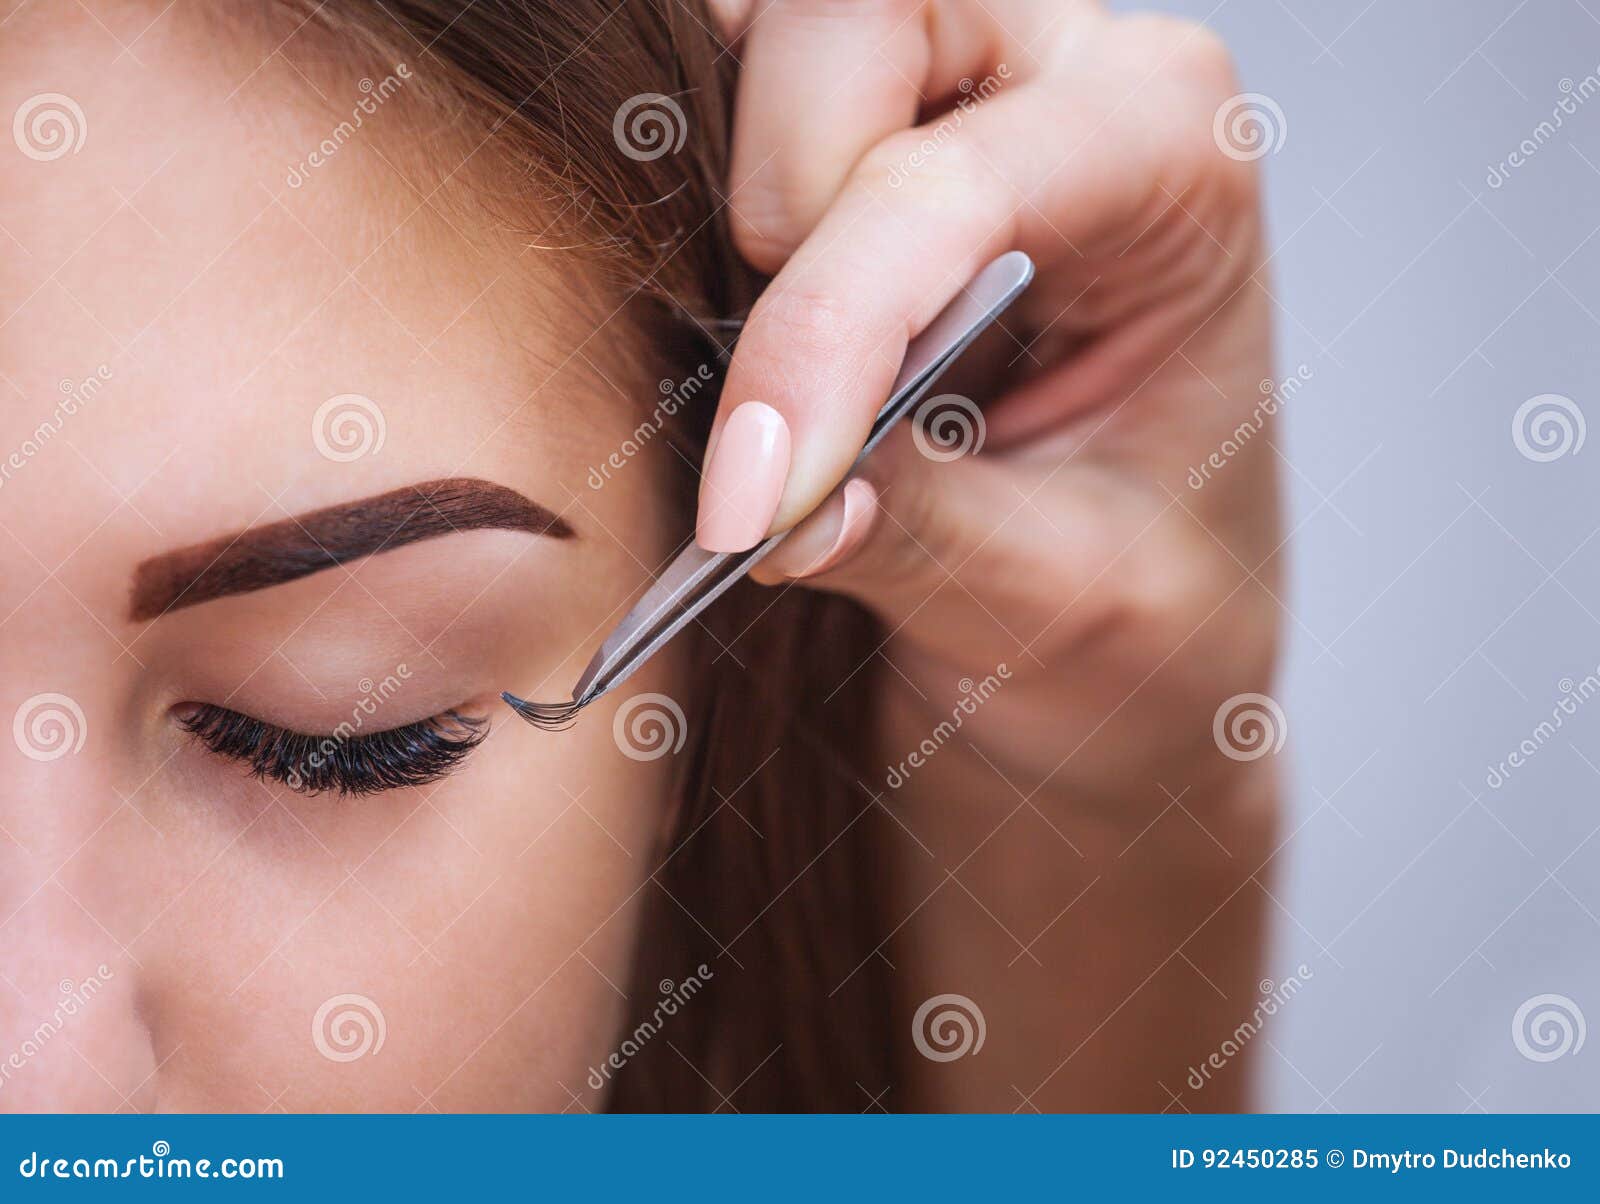 makeup master corrects, and strengthens eyelashes beams, holding out a pair of tweezers in a beauty salon